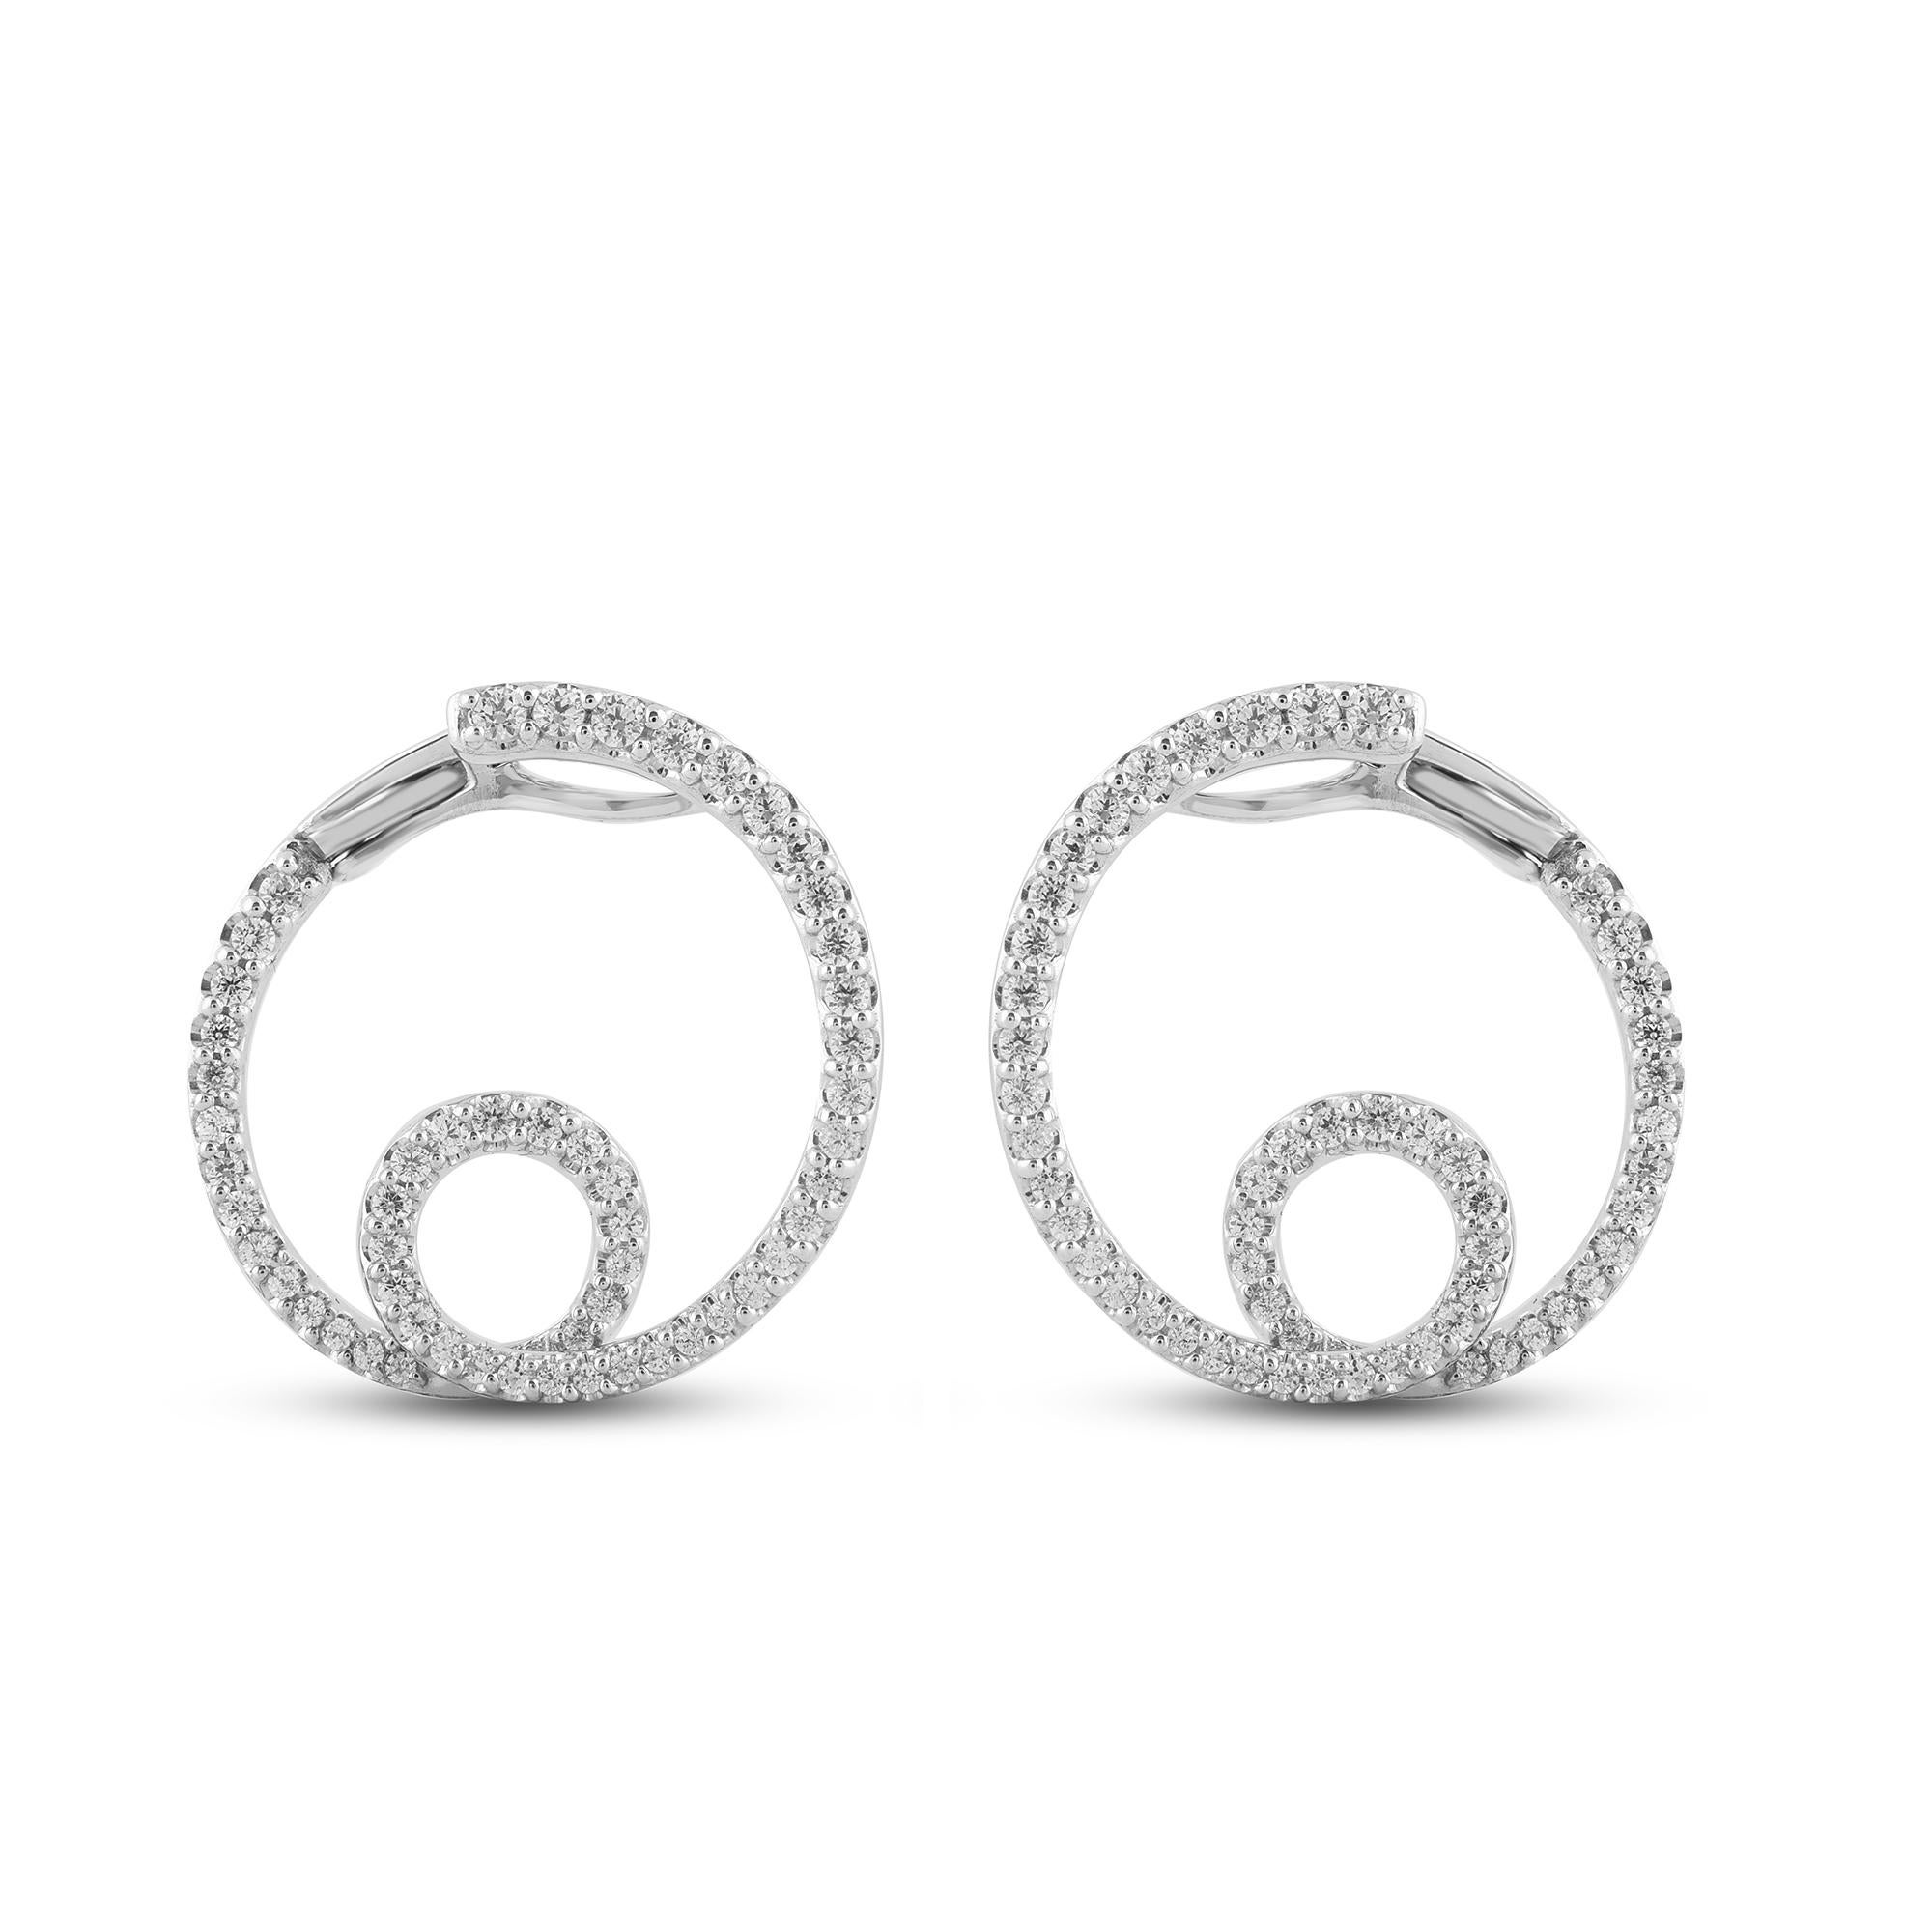 Top of your favorite look with this stunning diamond stud earrings. The earrings is crafted from 14 karat white gold and features 108 round diamond set in Prong setting, it shines brightly in H-I color I2 clarity. A high polish finish complete the